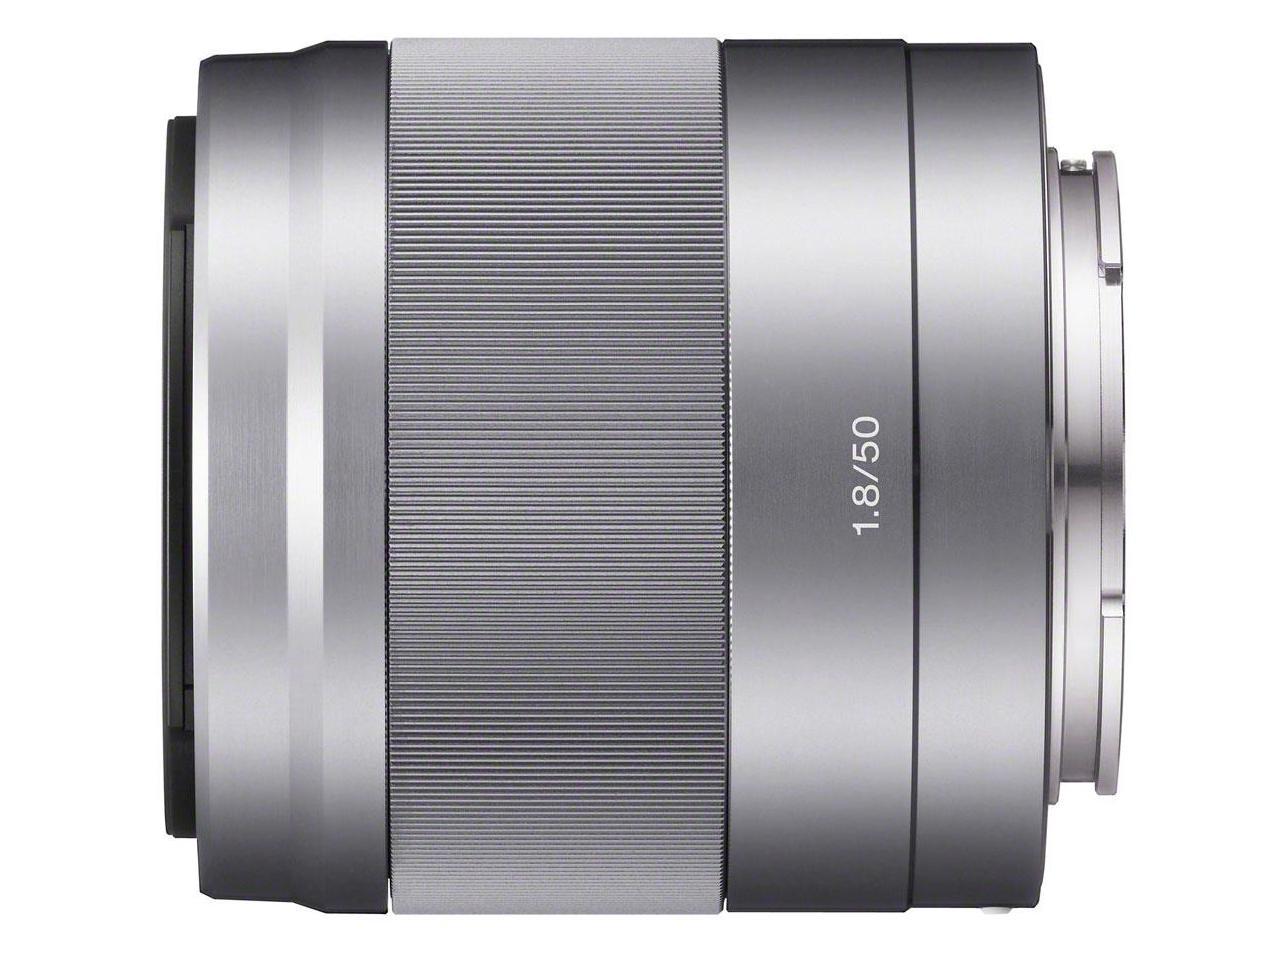 SONY SEL50F18 Compact ILC Lenses 50mm f/1.8 Lens Silver